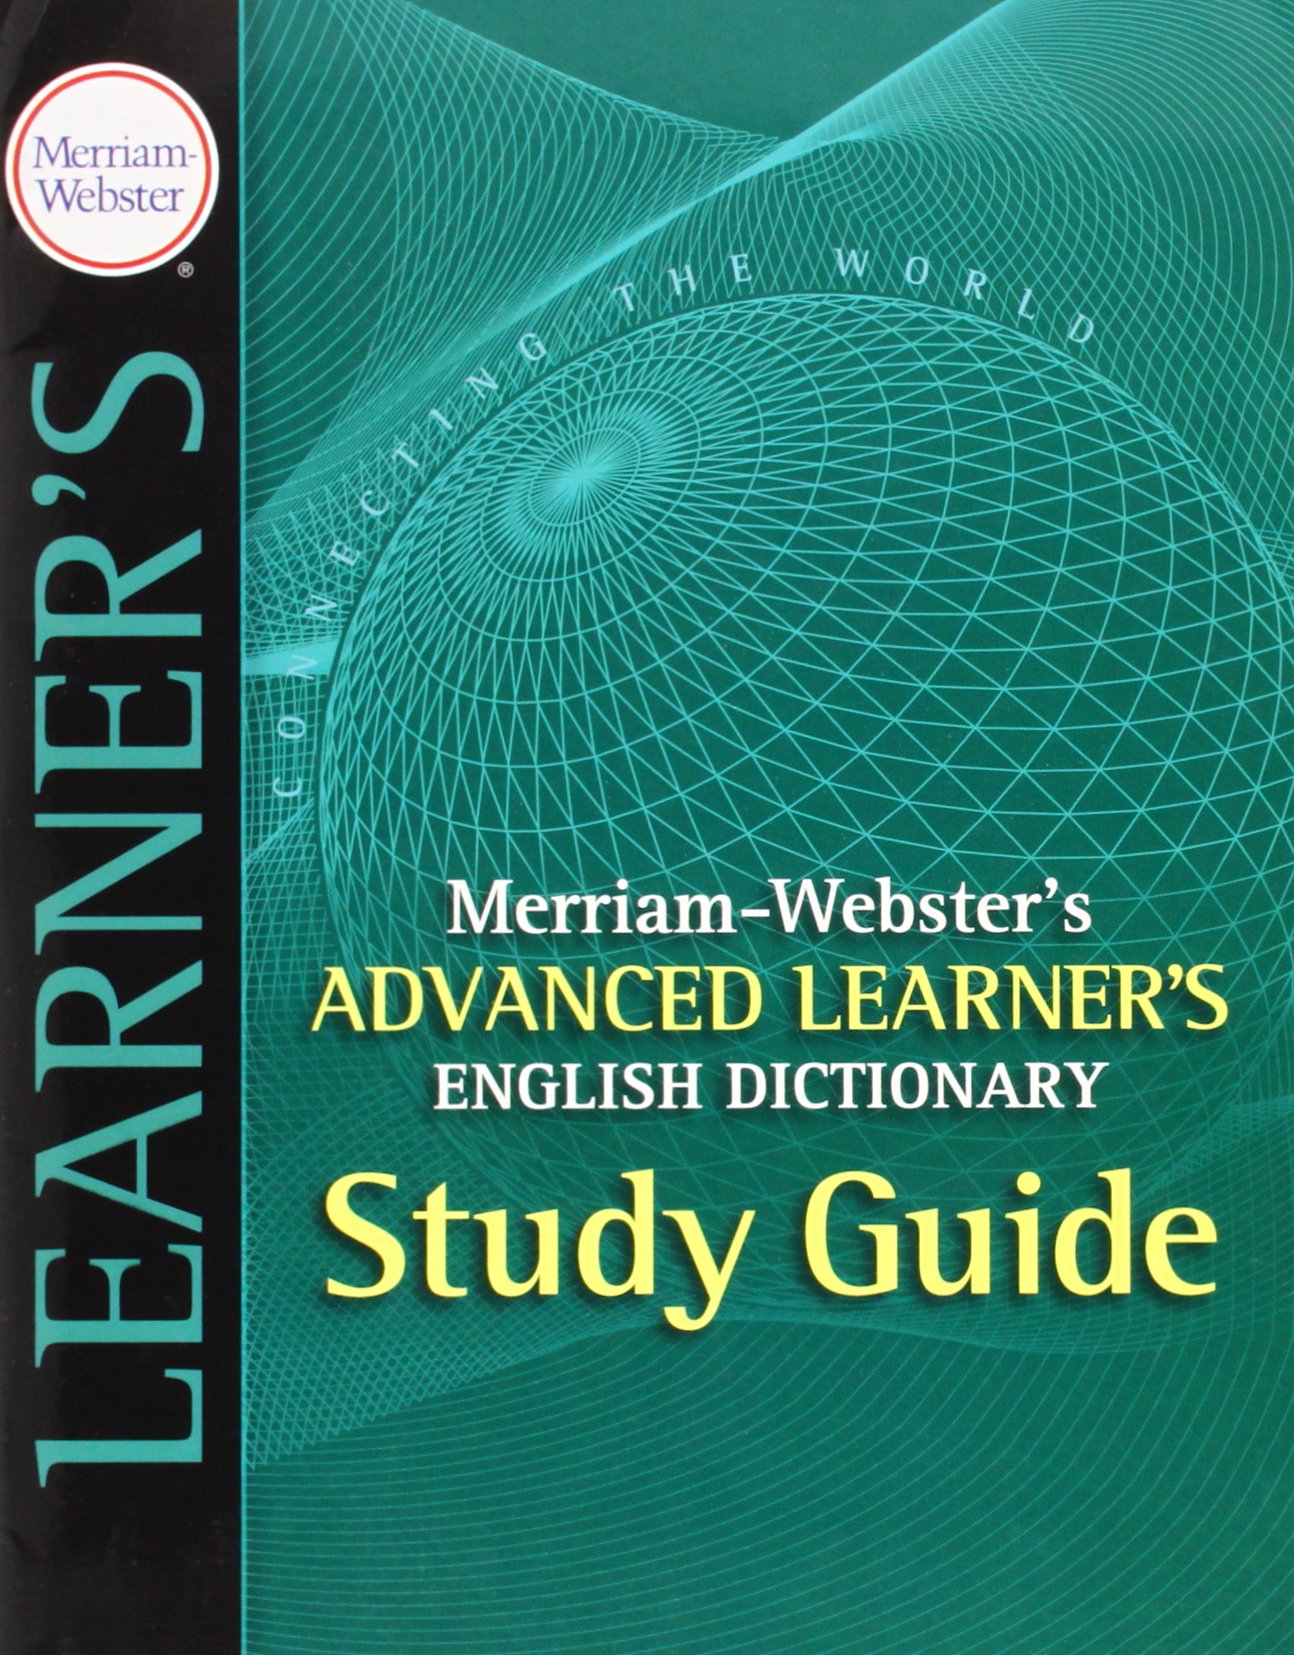 Merriam-Webster's Advanced Learner's English Dictionary. Study Guide |  image